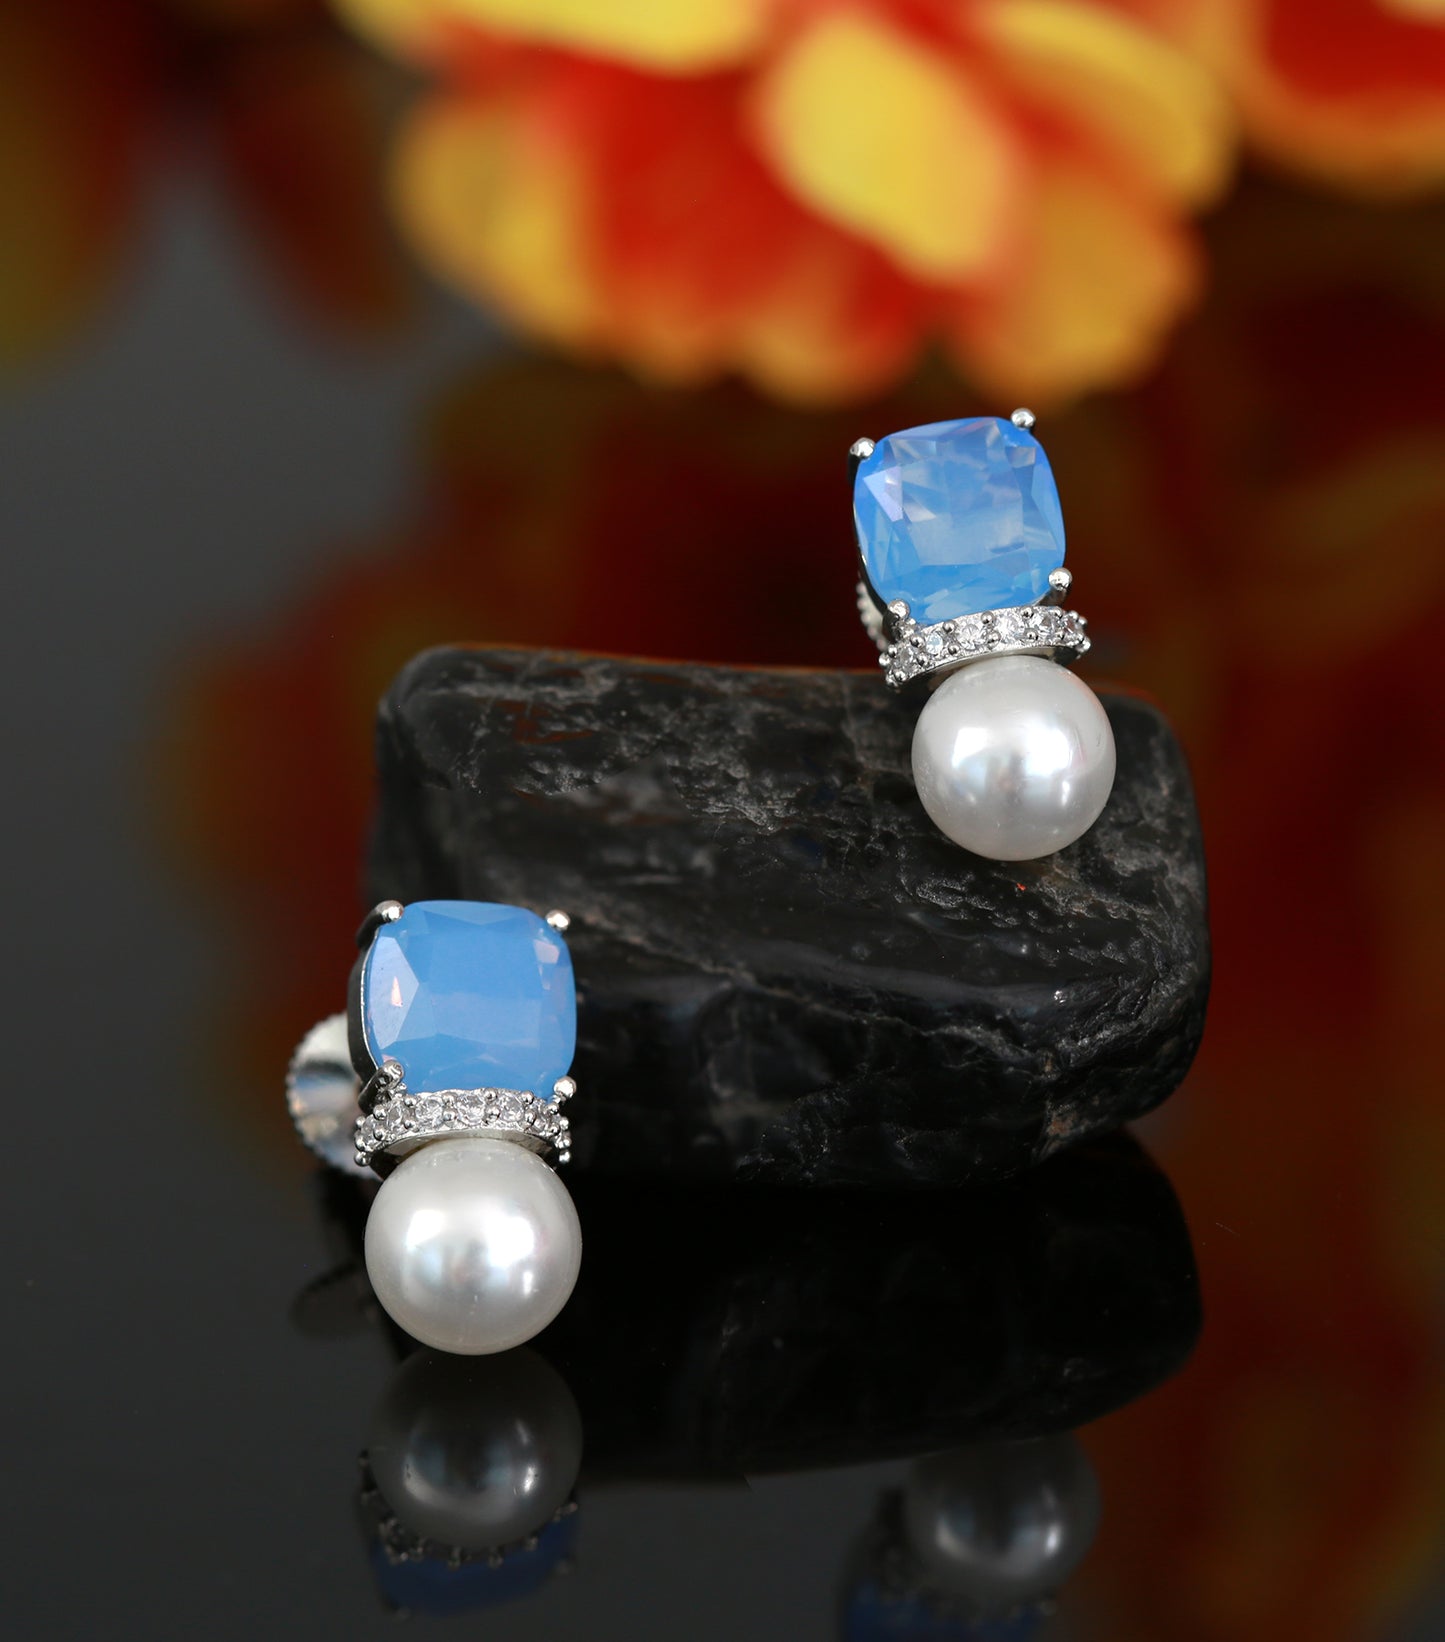 Exclusive Blue CZ stone Pearl Stud Earrings | Silver tops